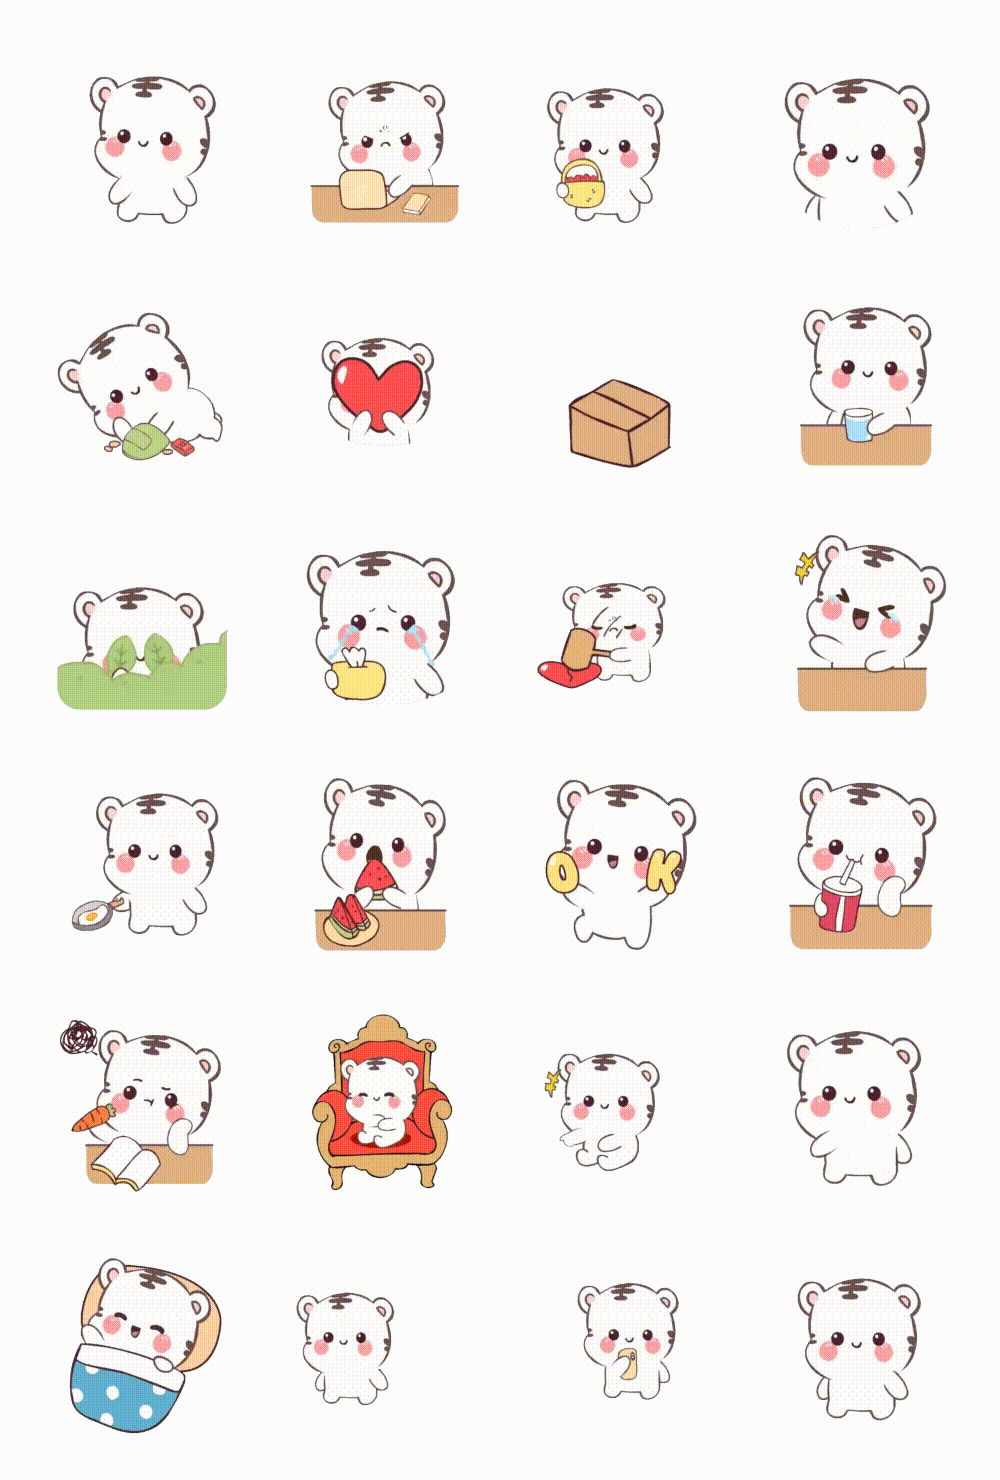 White Tiger 2 Animals,Animation/Cartoon,Food/Drink sticker pack for Whatsapp, Telegram, Signal, and others chatting and message apps